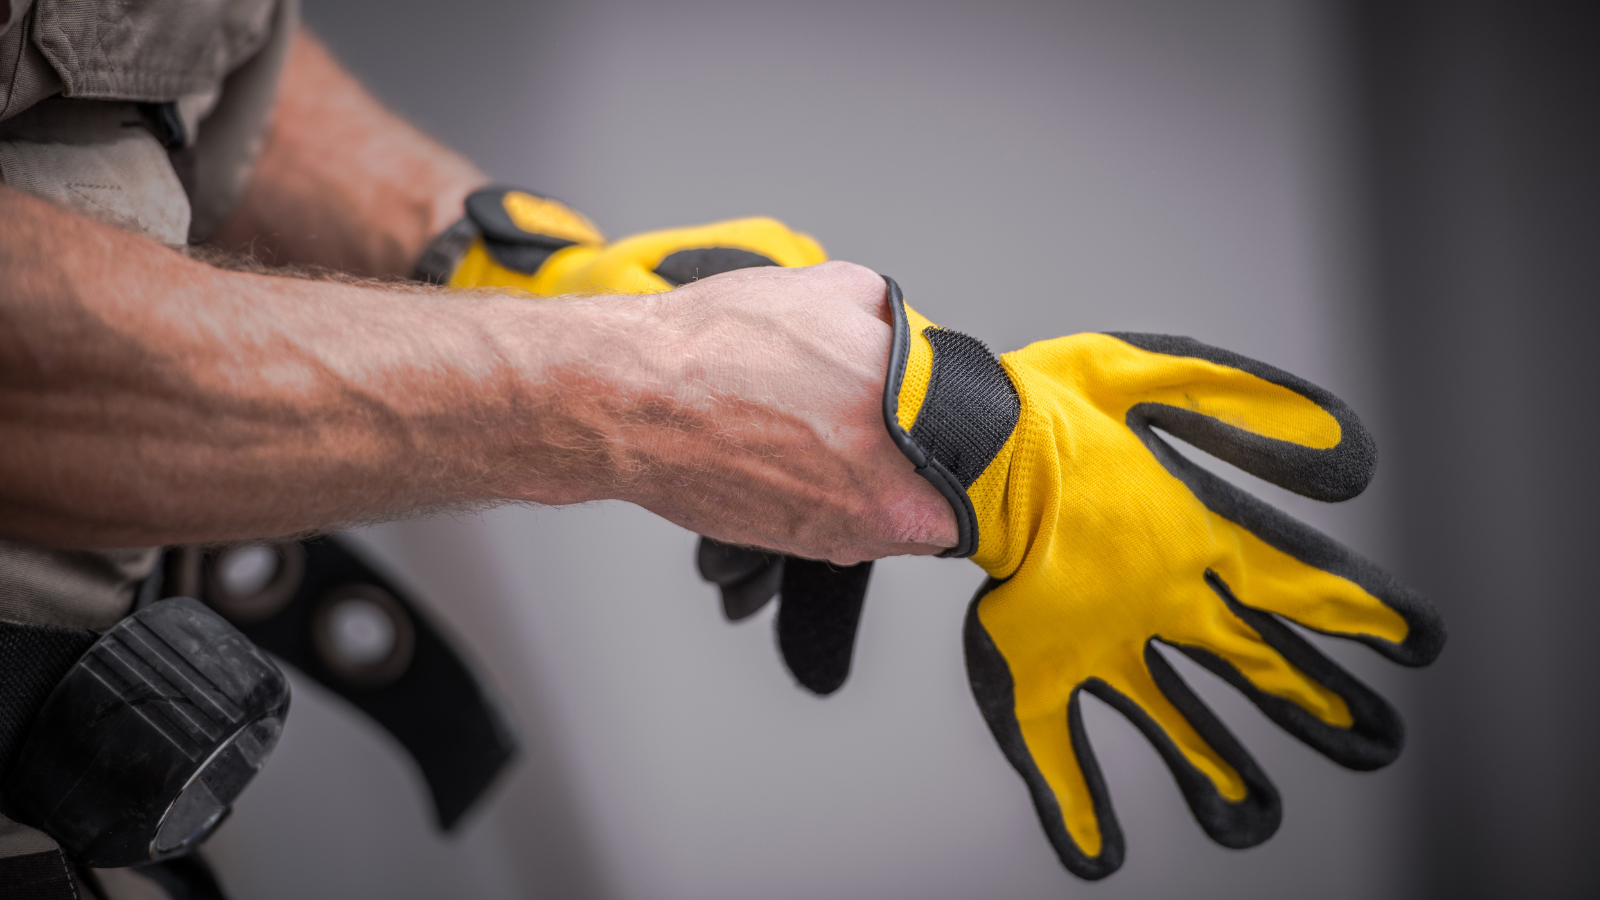 toolant Work Gloves: Superior Winter & Cut Resistant Glove Options 